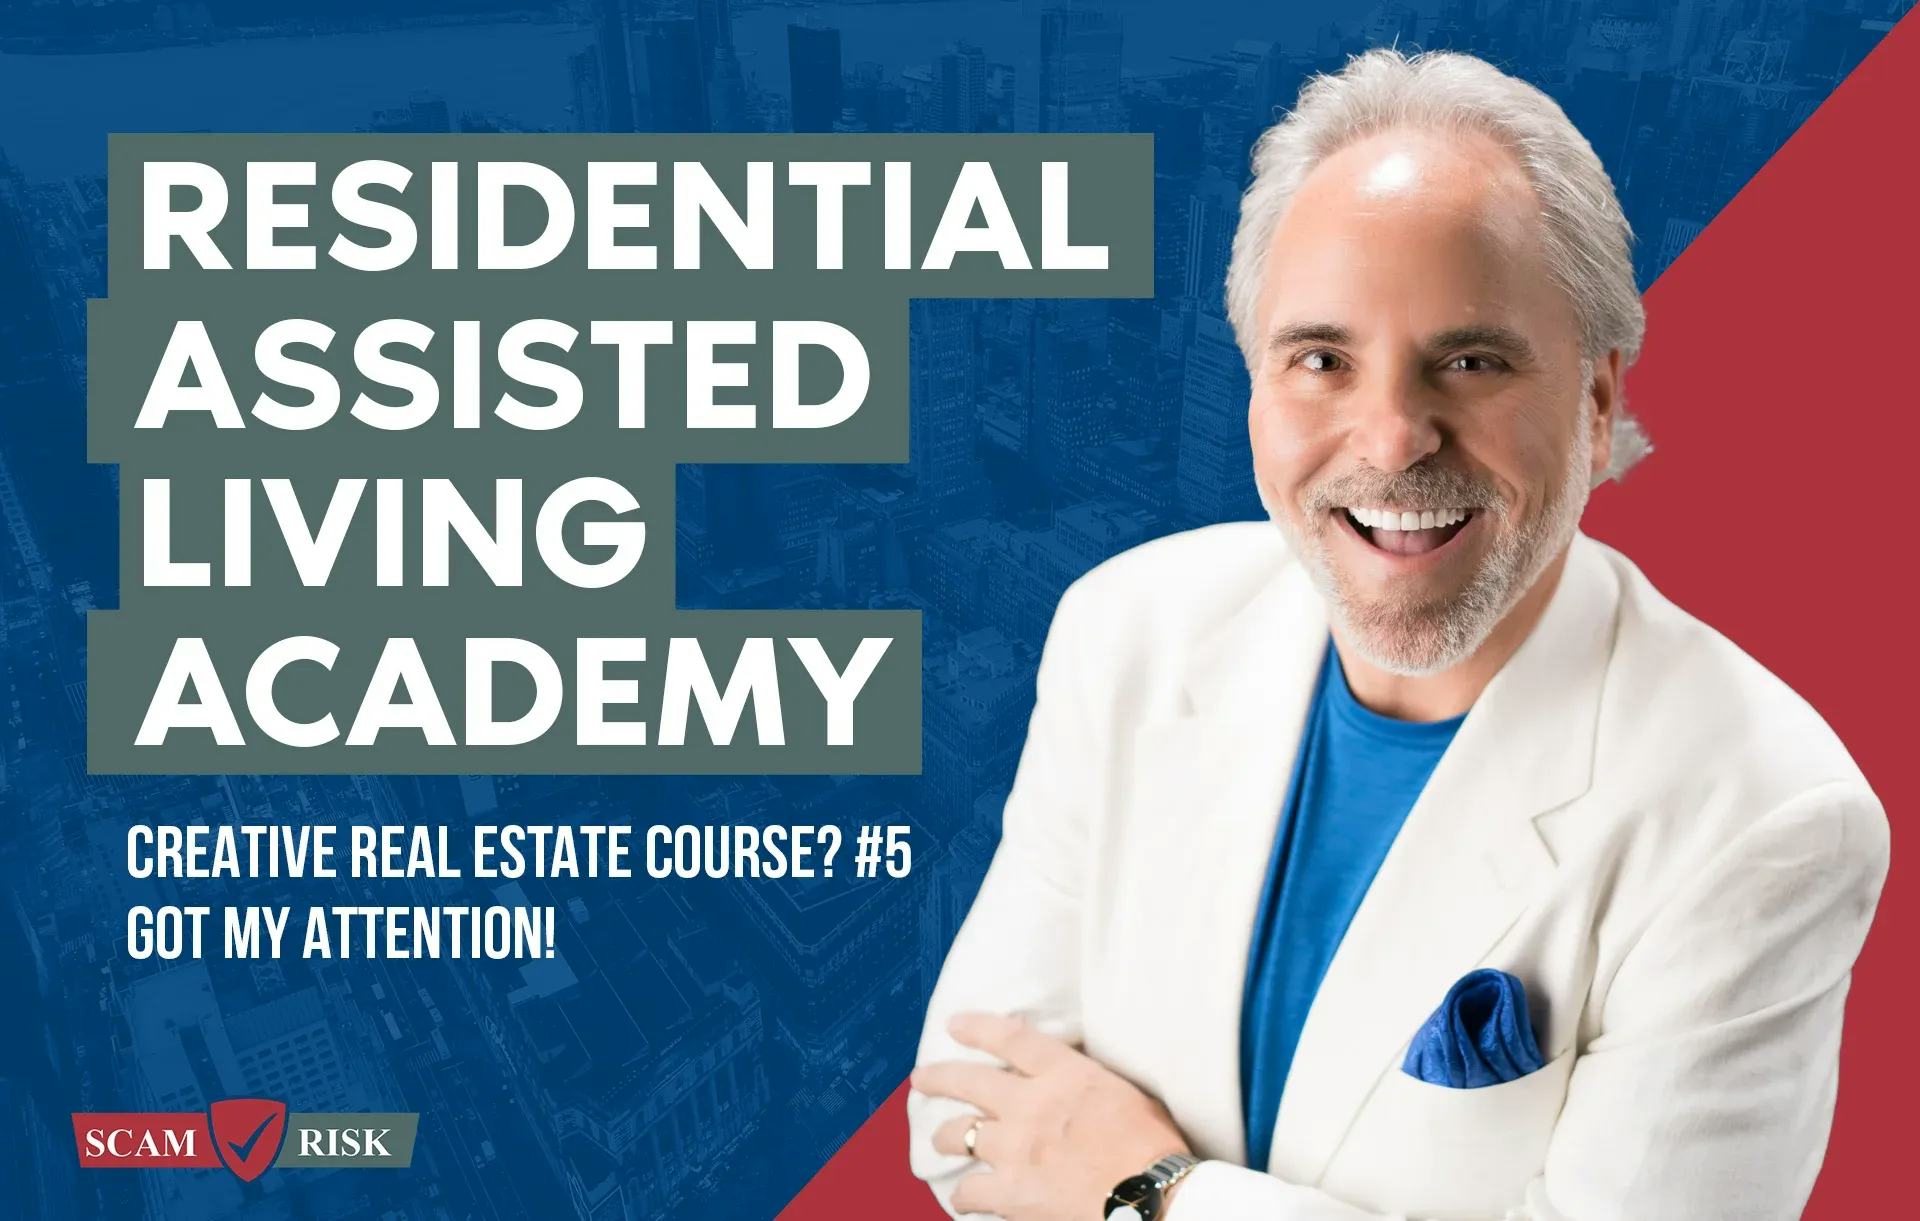 Residential Assisted Living Academy Review ([year] Update): Creative Real Estate Course?